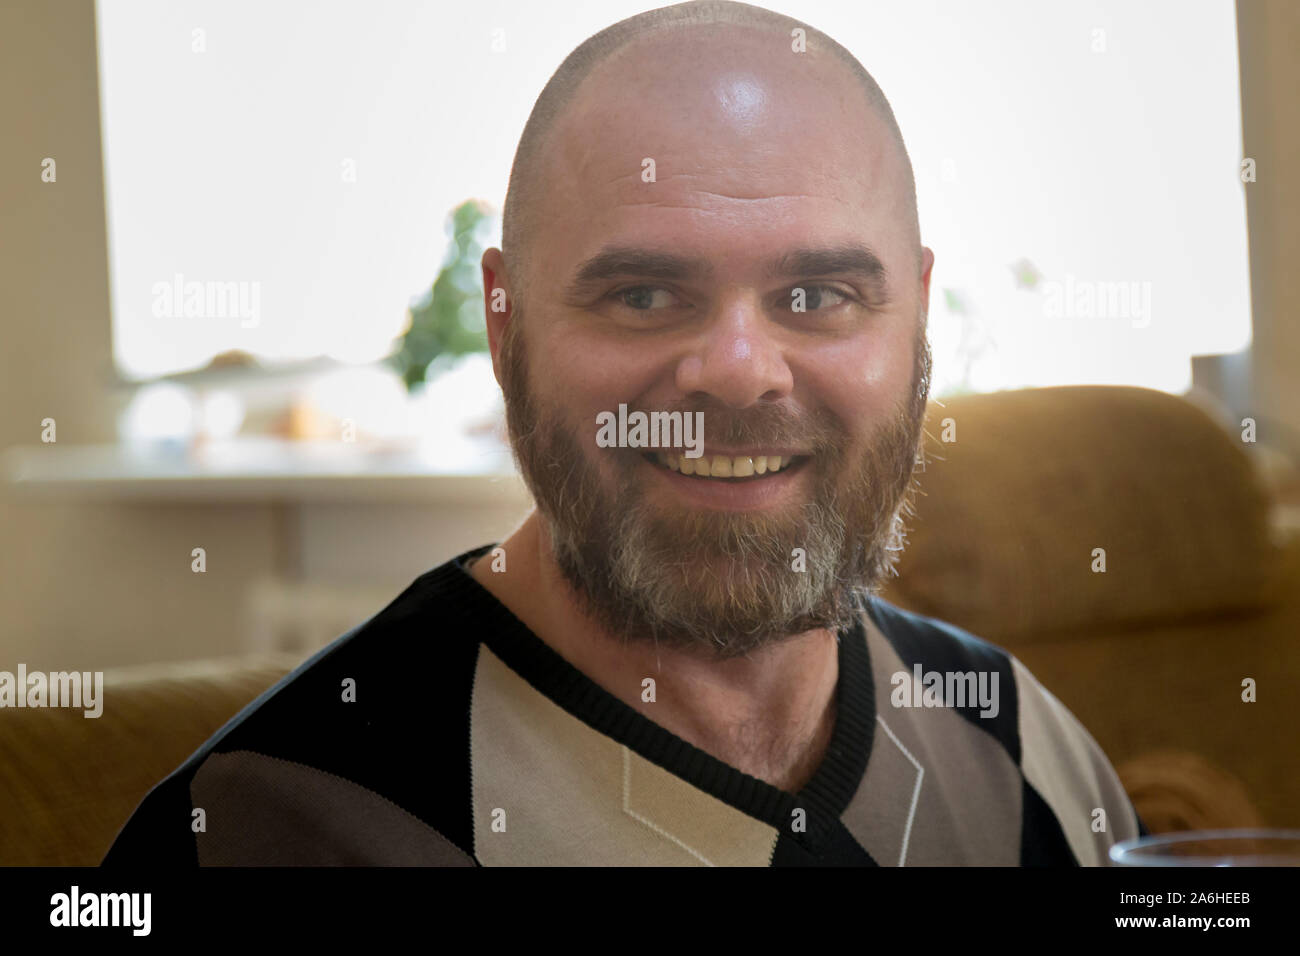 Portrait of a bald man with a beard Stock Photo